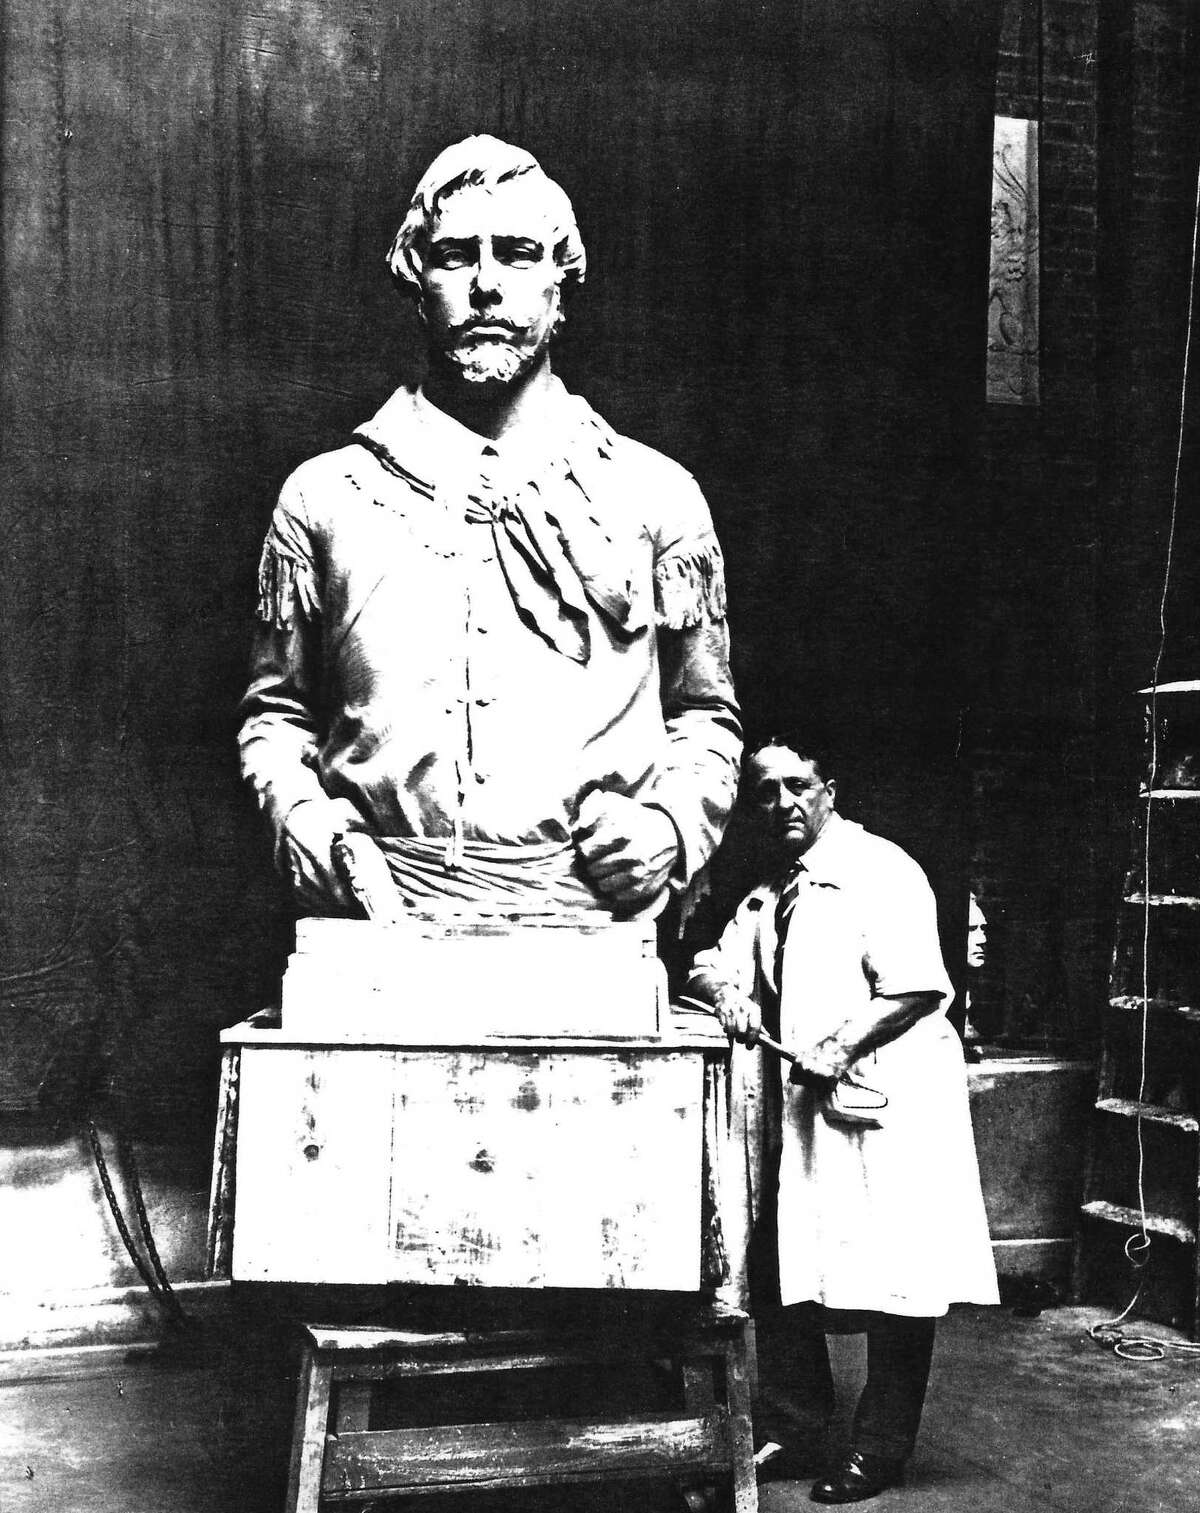 Pompeo Coppini, posing with his bronze bust of fellow Italian immigrant Prospero Bernardi, played several surprising roles in early iterations of what we know of today as Fiesta, according to new research.